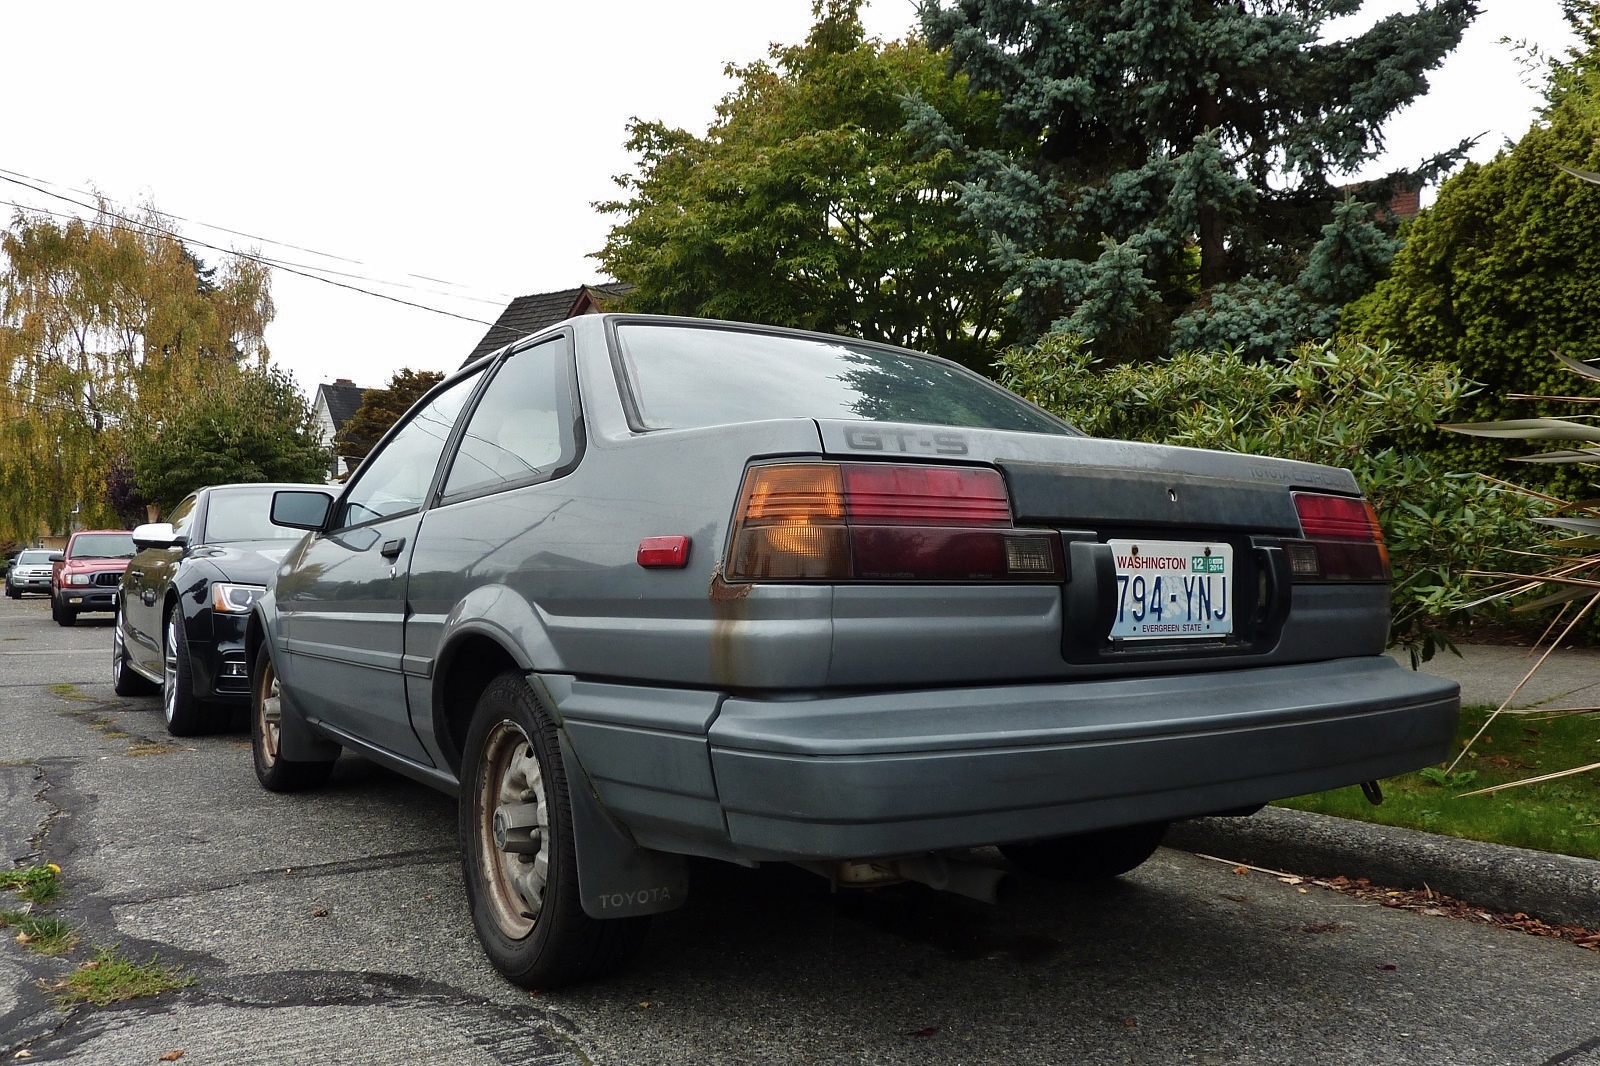 Seattle's Parked Cars: 1987 Toyota Corolla GT-S